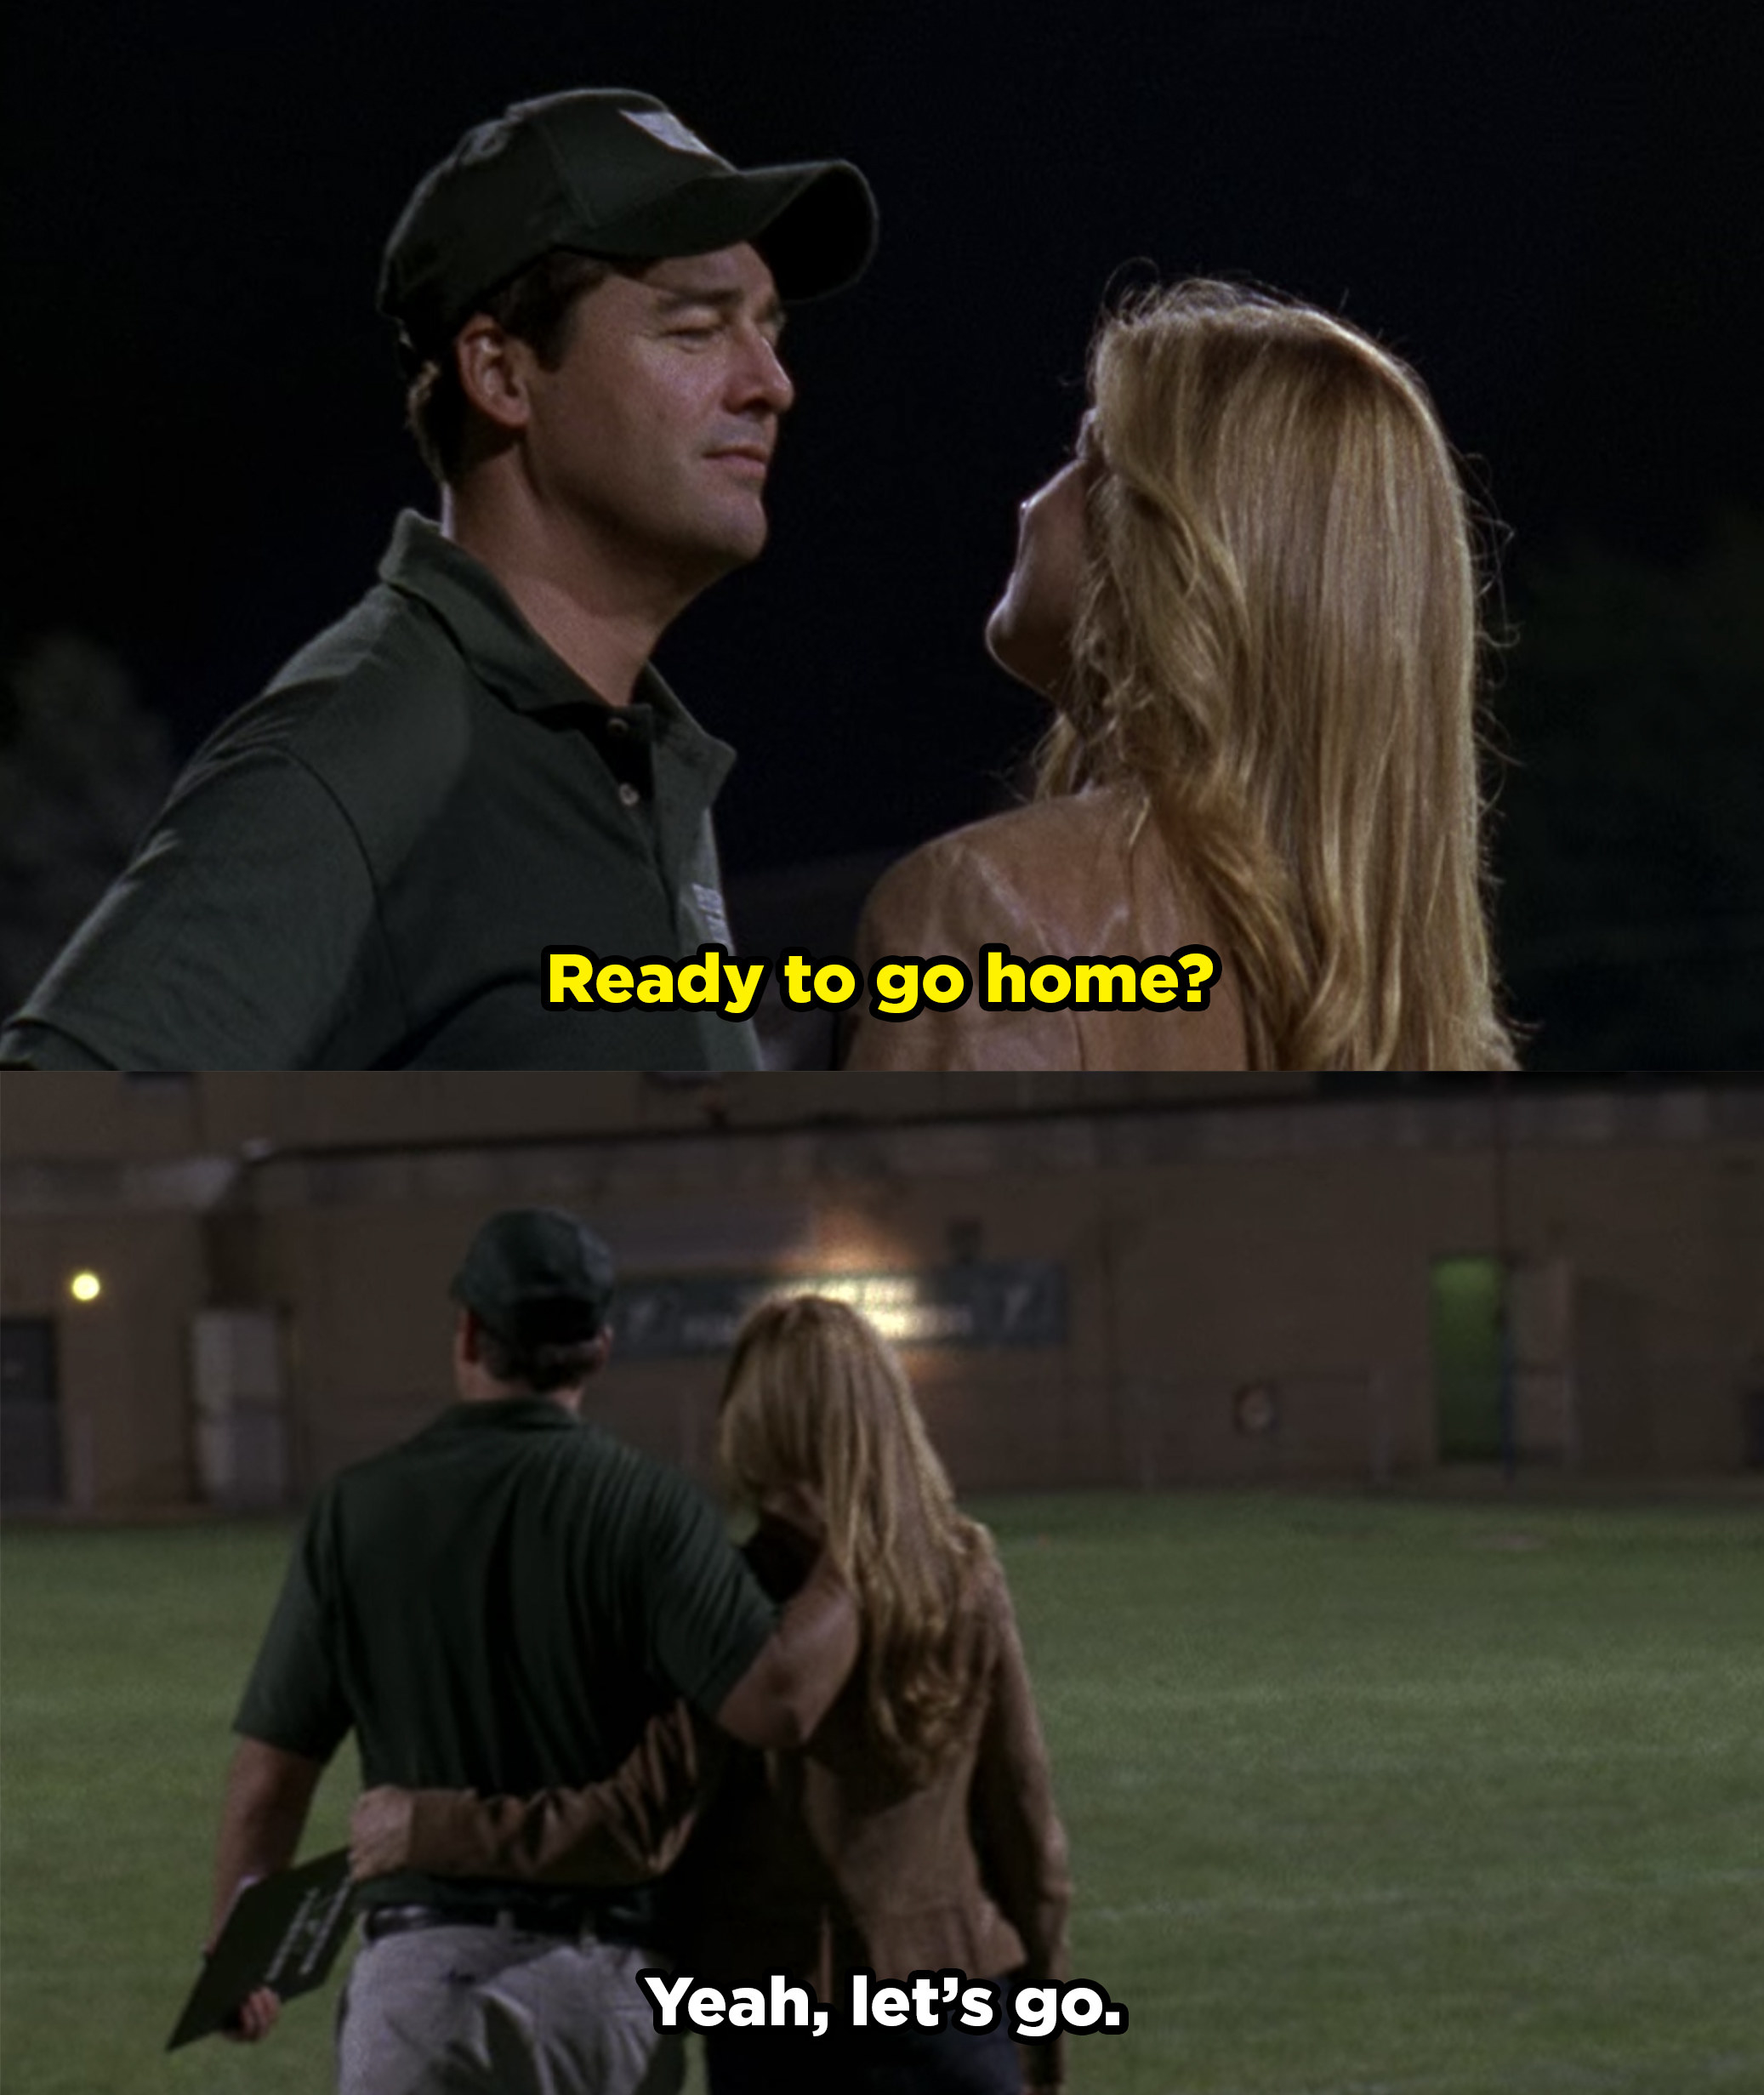 Tammy asks Eric if he&#x27;s ready to go and they walk off the field with their arms around each other.